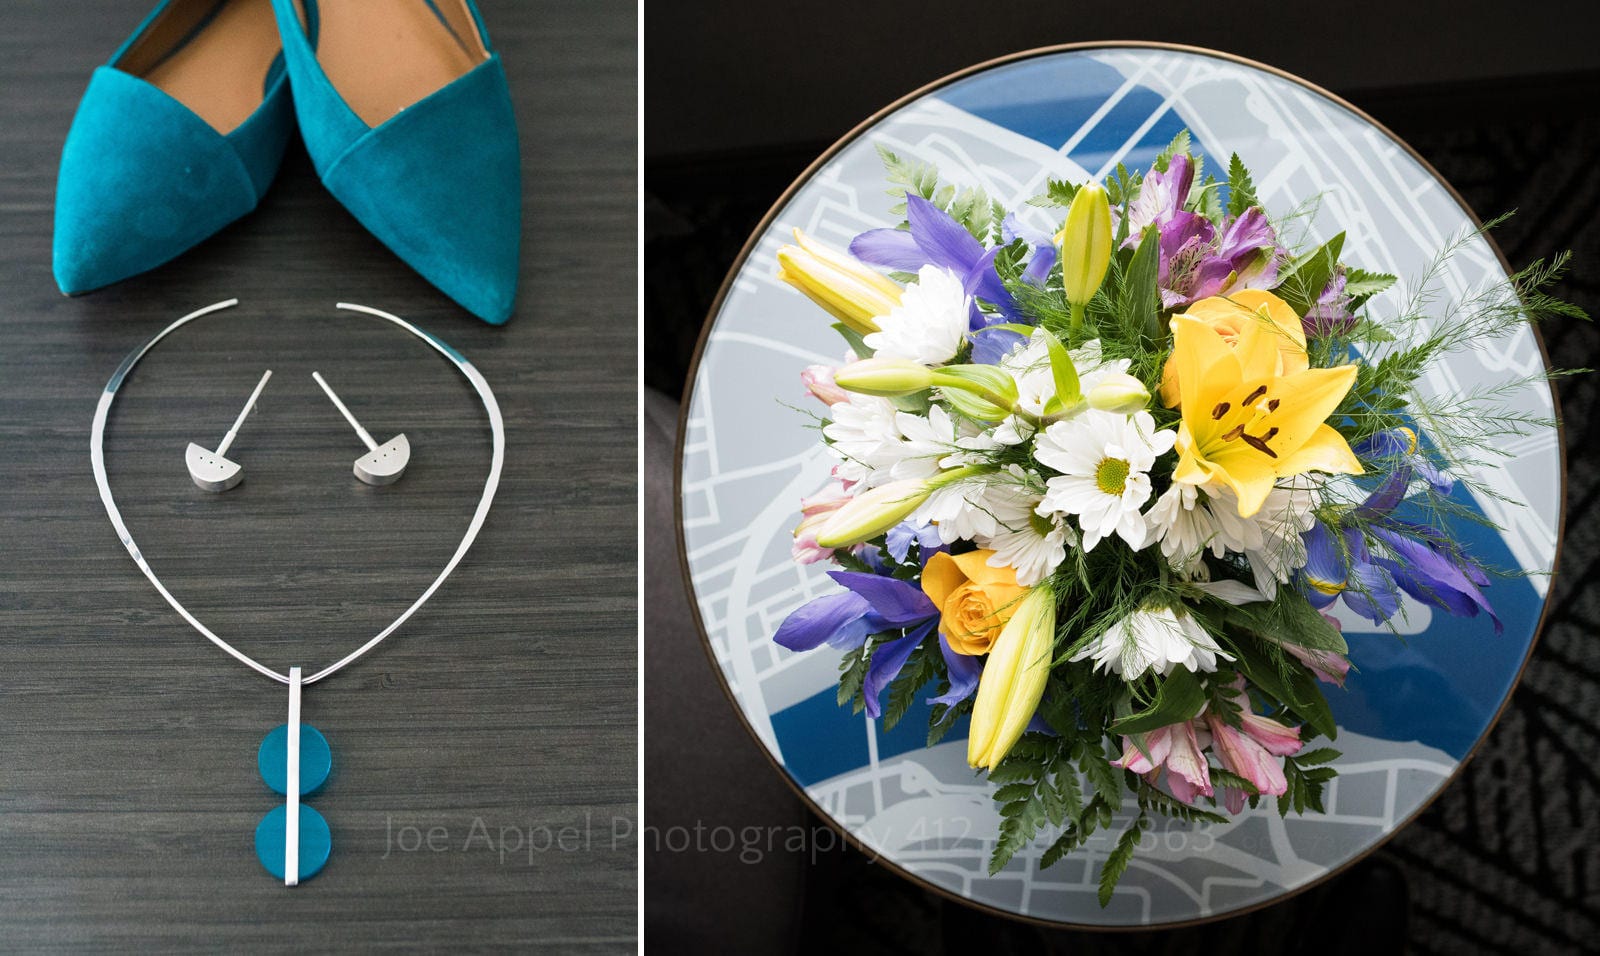 Teal colored shoes and silver jewelry along with a bouquet of yellow and white flowers.